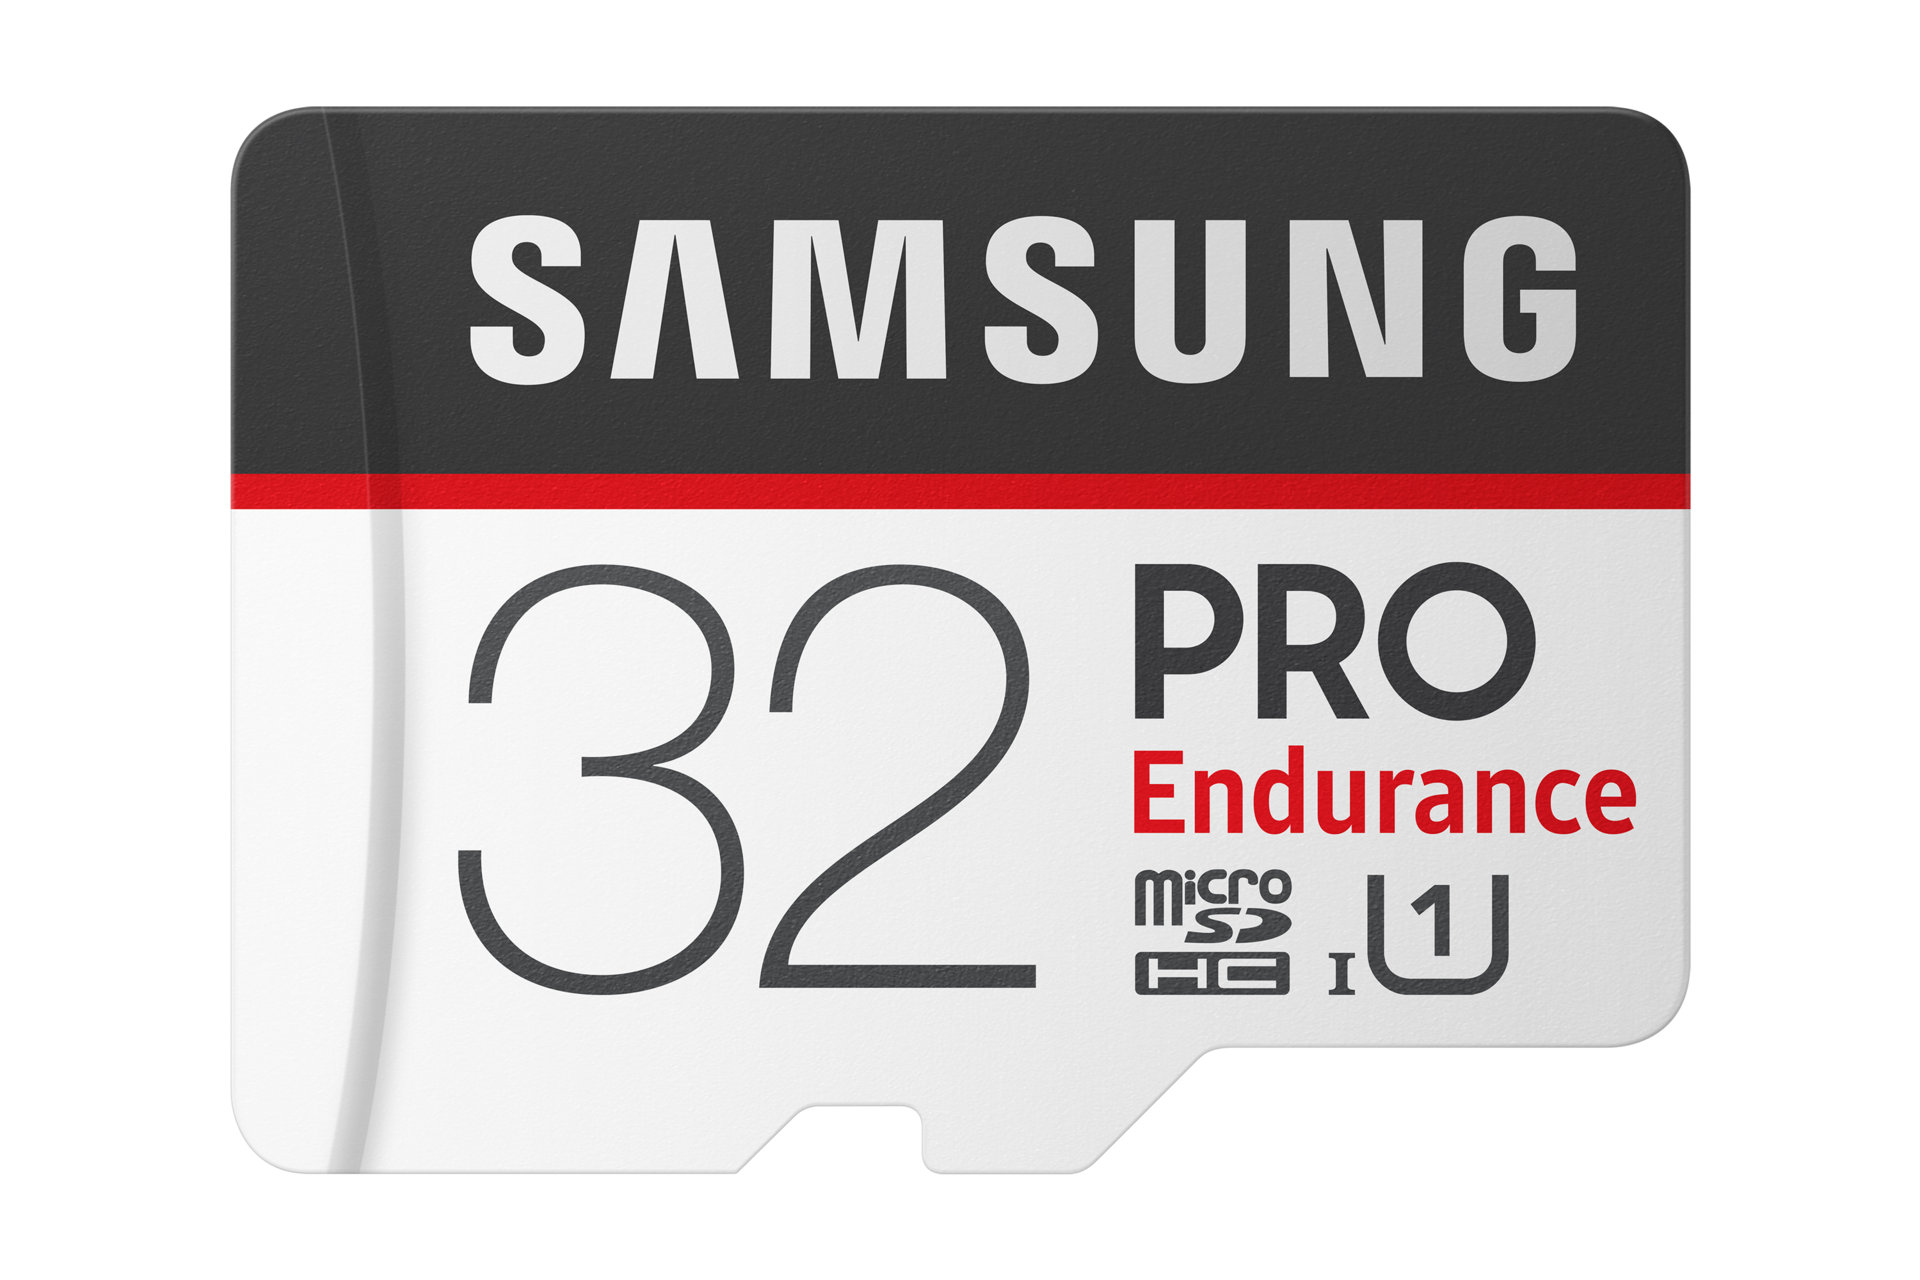 https://images.samsung.com/is/image/samsung/ch-fr-pro-endurance-microsd-card-with-adapter-mb-mj32ga-eu-frontblack-98476813?$650_519_PNG$